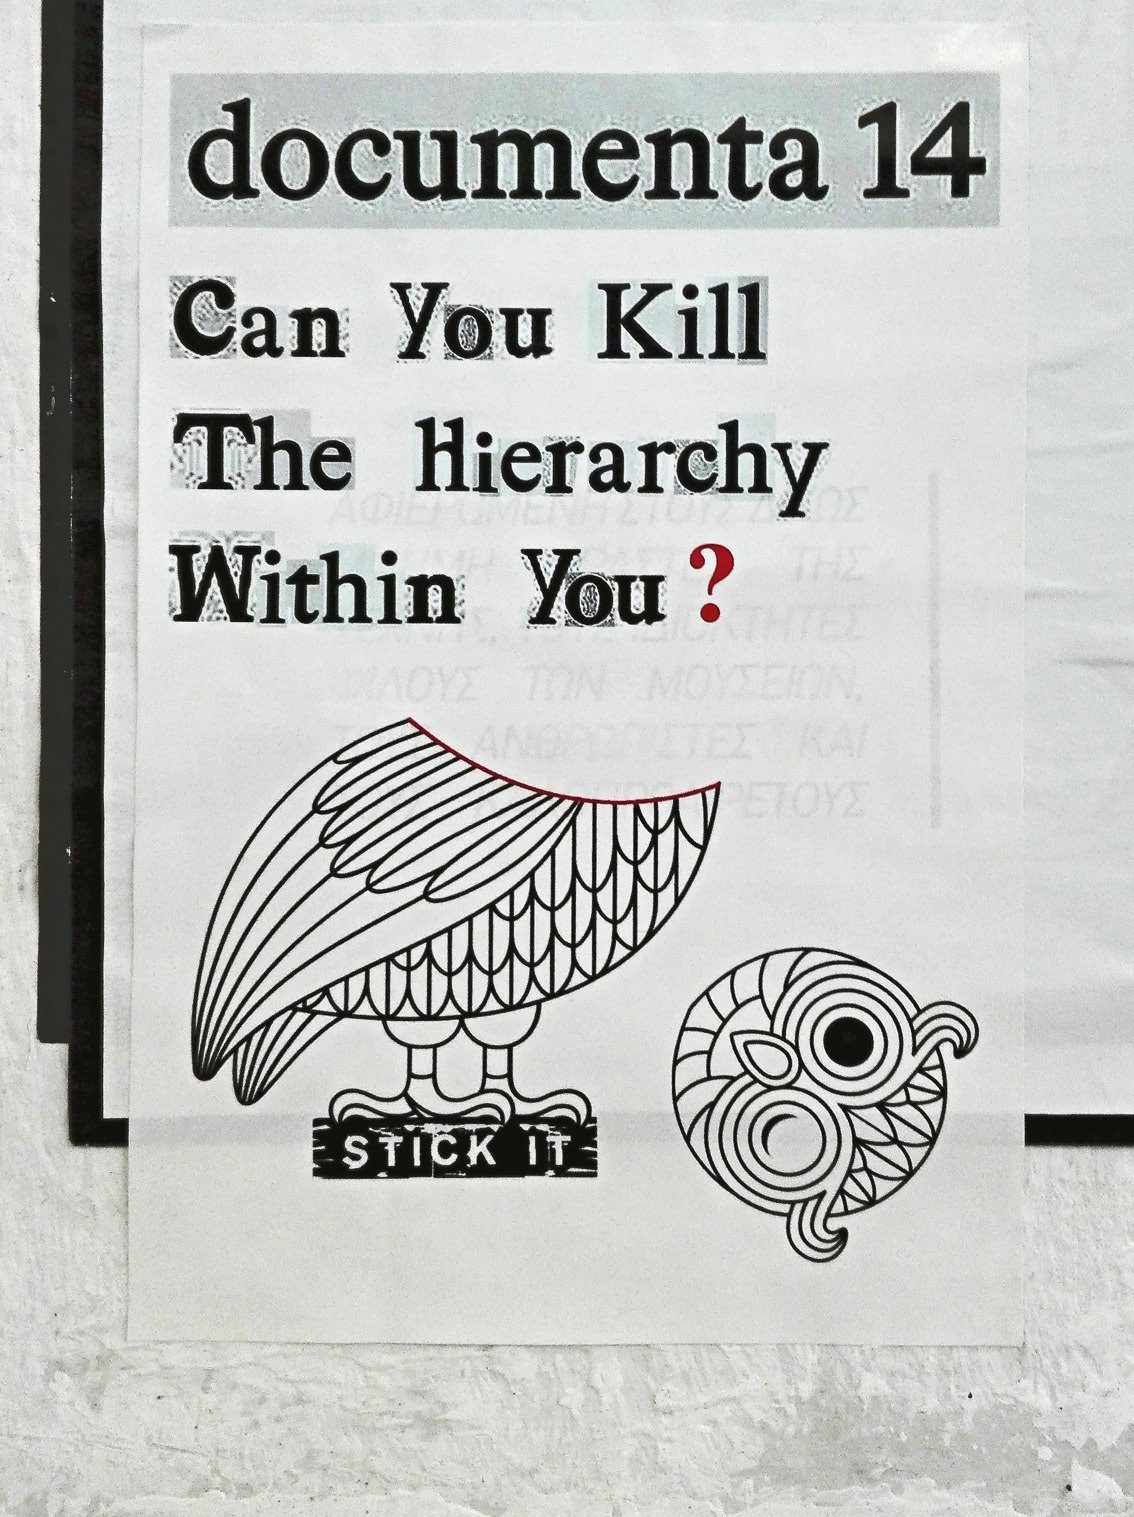 A poster with a drawing of the Athenian owl decapitated, and the words: documenta 14: Can You Kill The Hierarchy Within You?